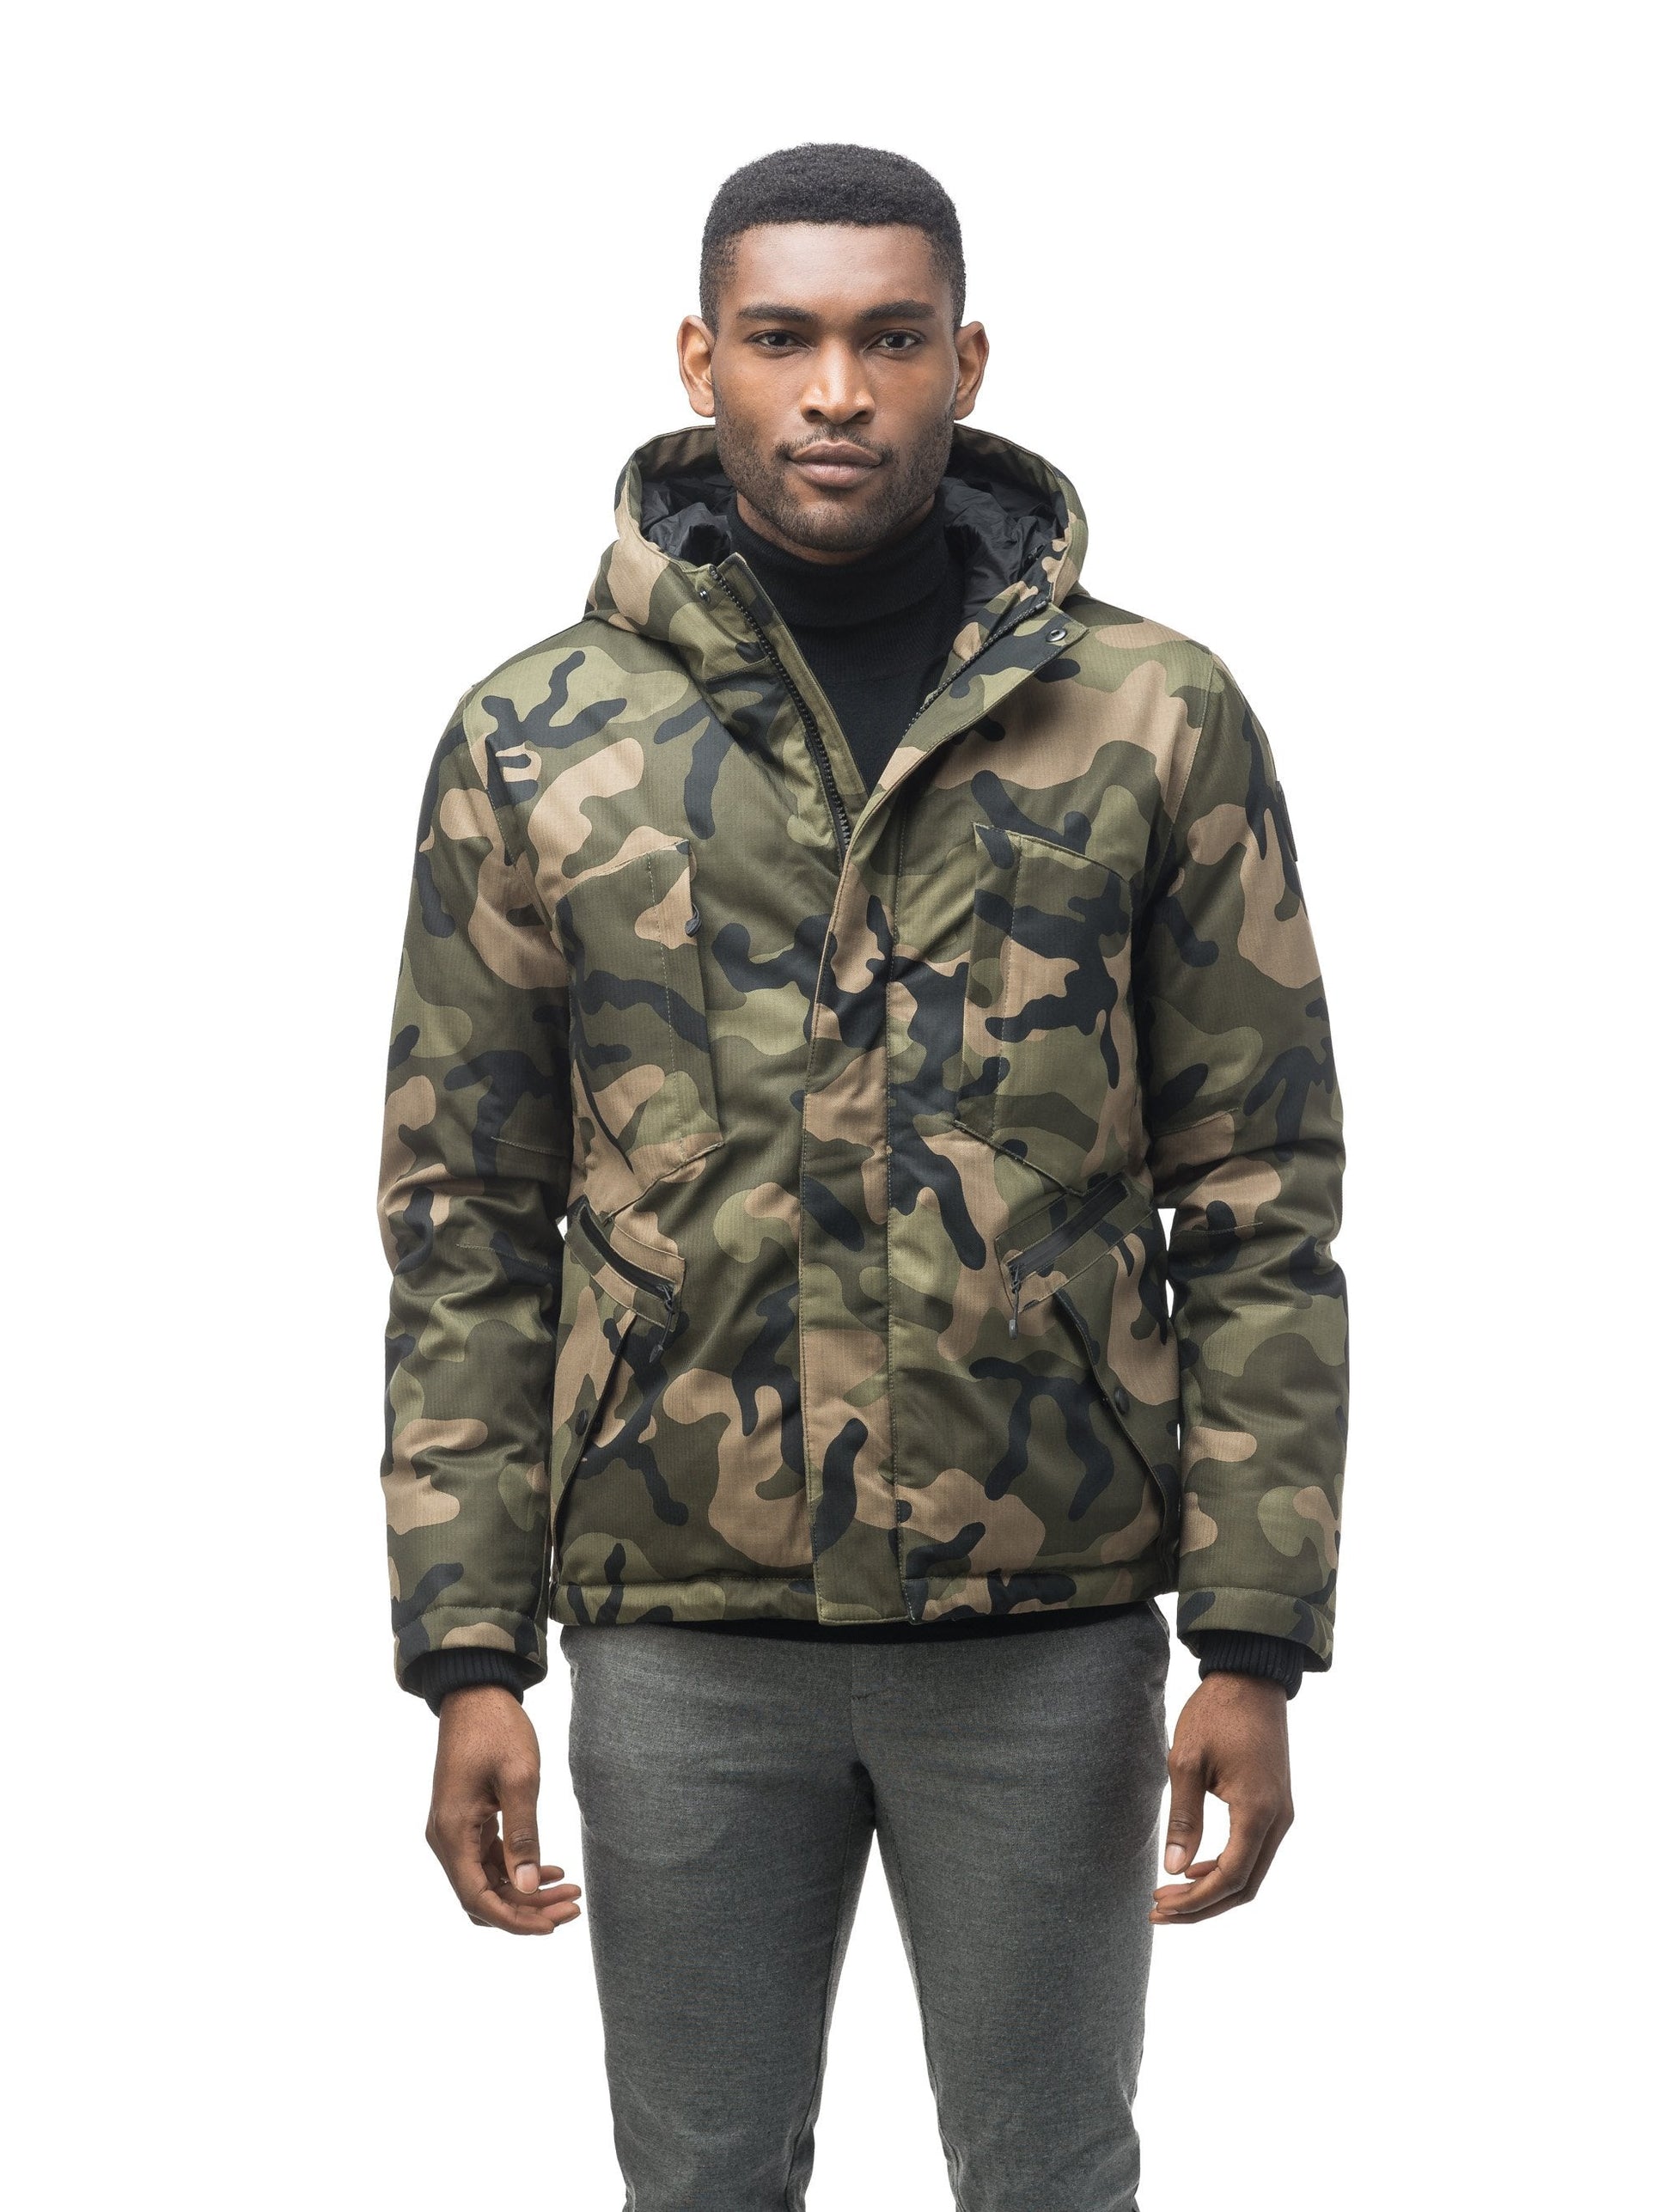 Men's waist length light down coat equipped with six exterior pockets and a hood in Camo